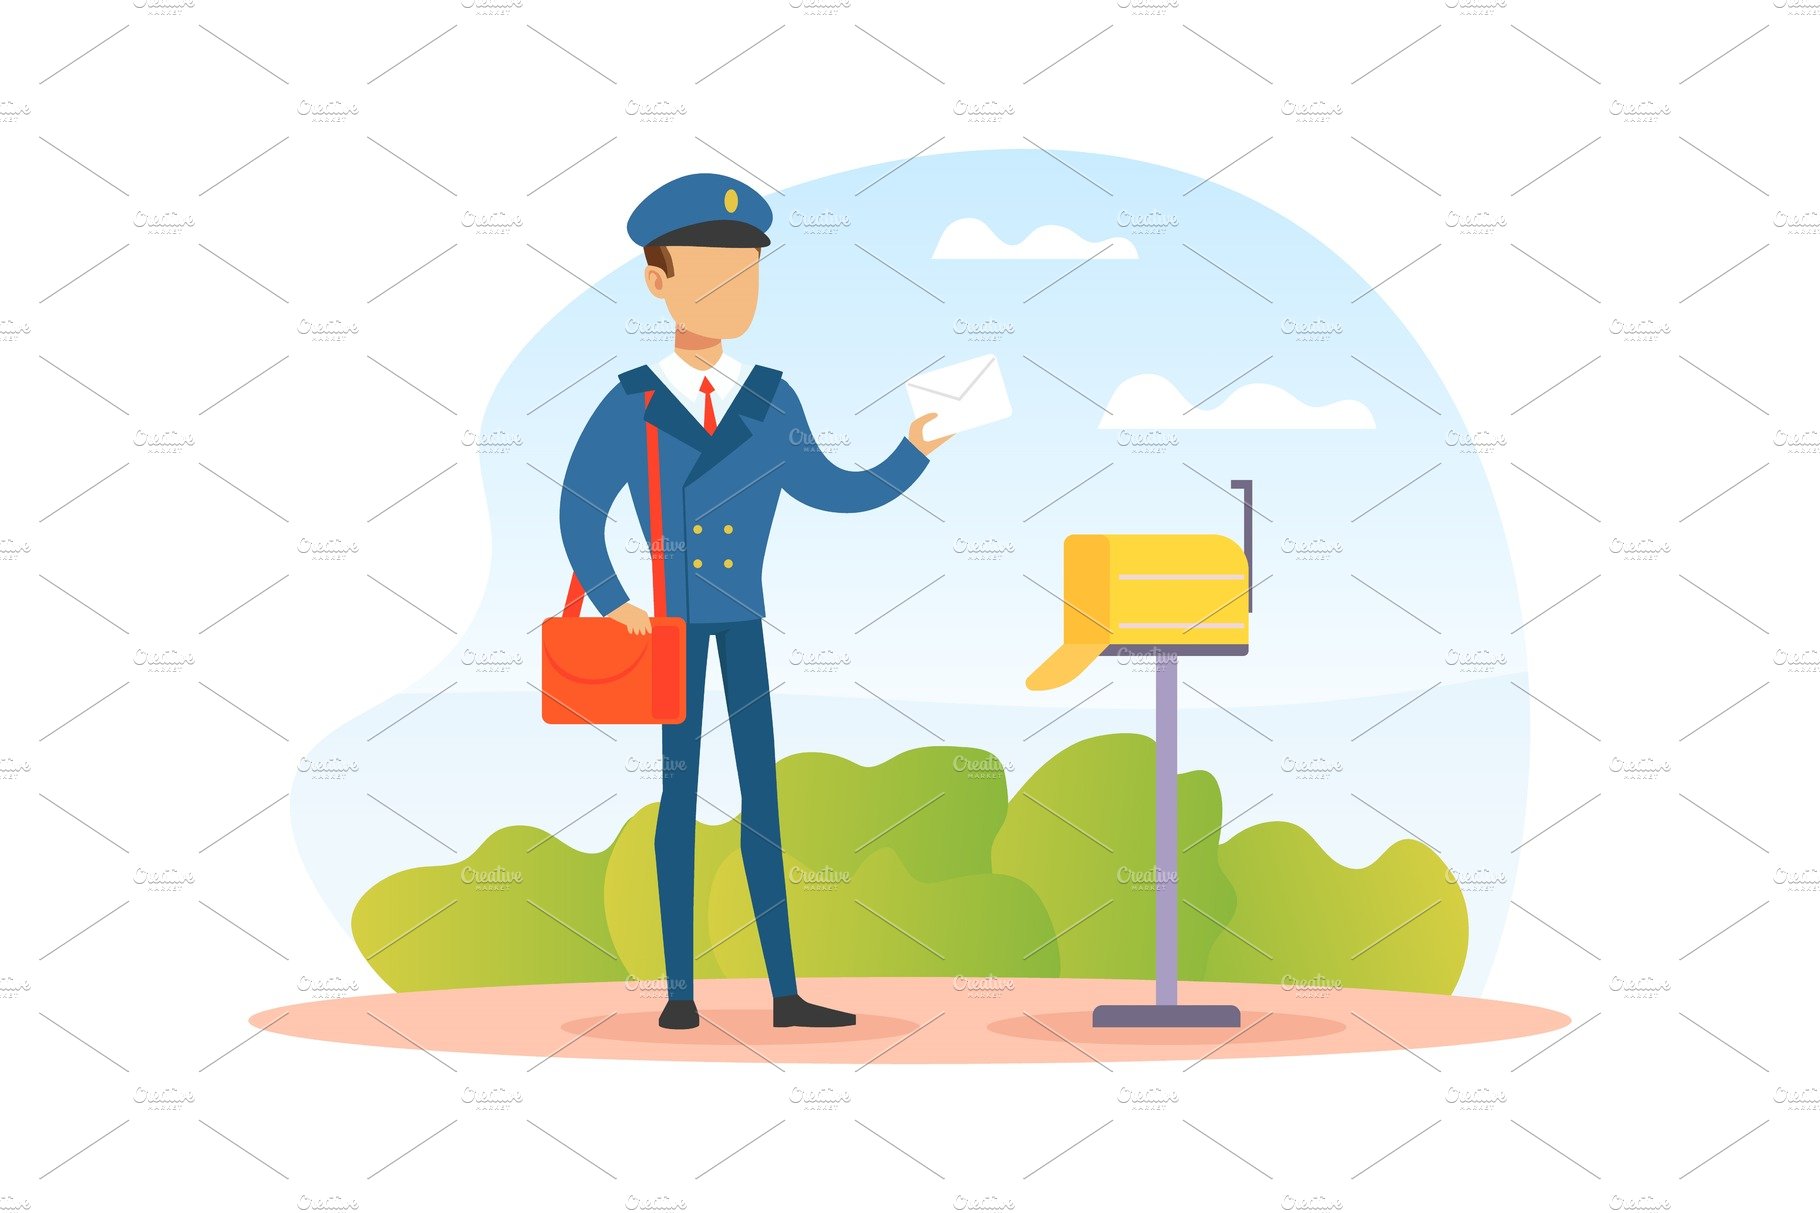 Postman Putting Letter in Mailbox cover image.